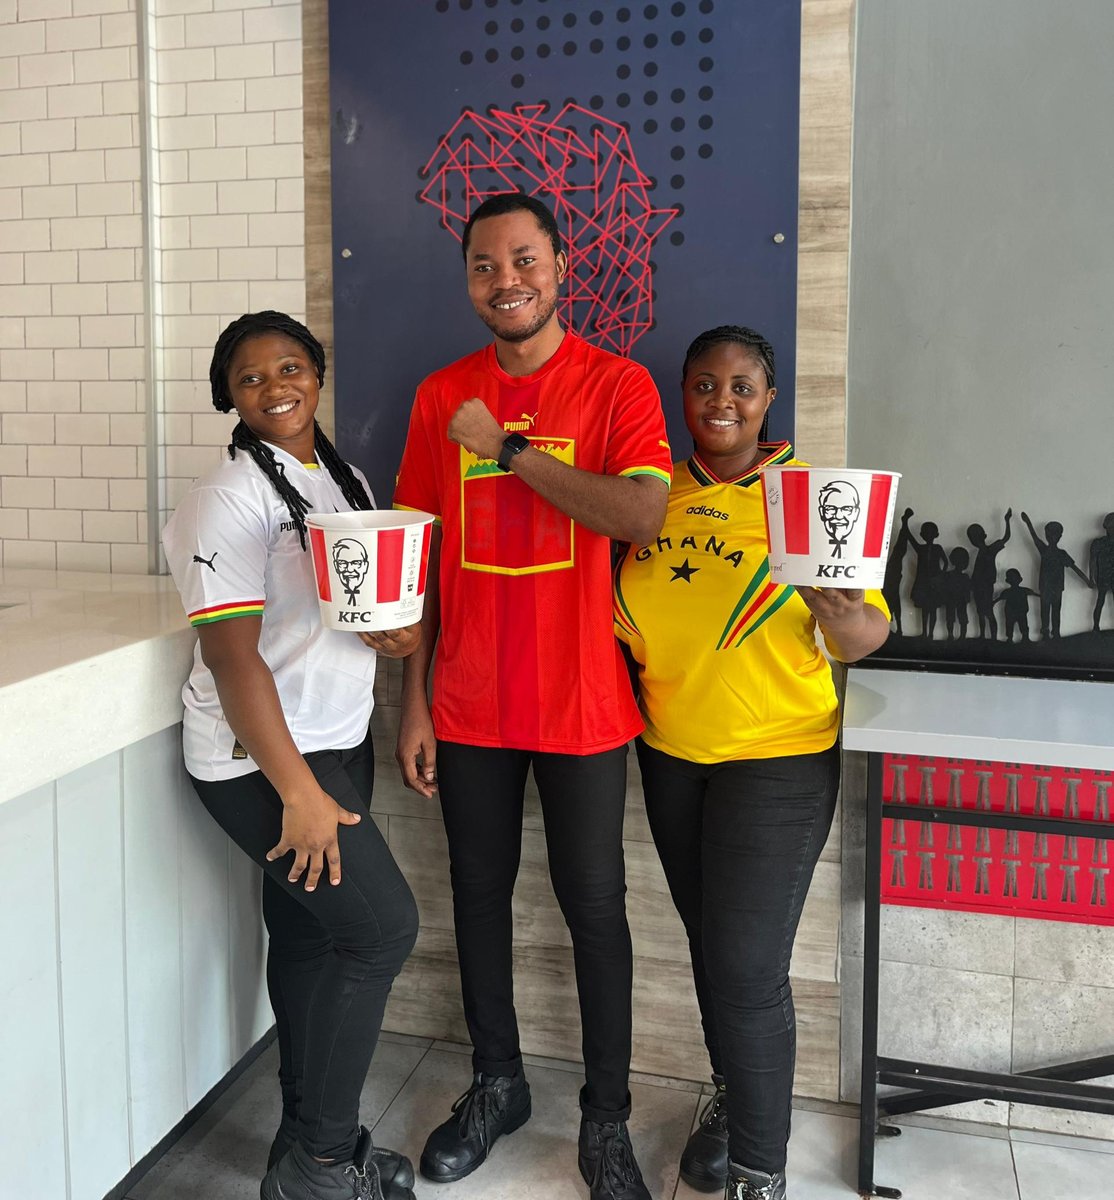 Onto the next game! Go for victory, #Blackstars 🇬🇭 💪🏾⚽ What's your prediction? Comment below! We will select five correct predictions and each winner will receive our Streetwise 2 + Free Drink. Don't forget to Like, Retweet and add hashtag #KFCGhana to make it valid. #AFCON2023